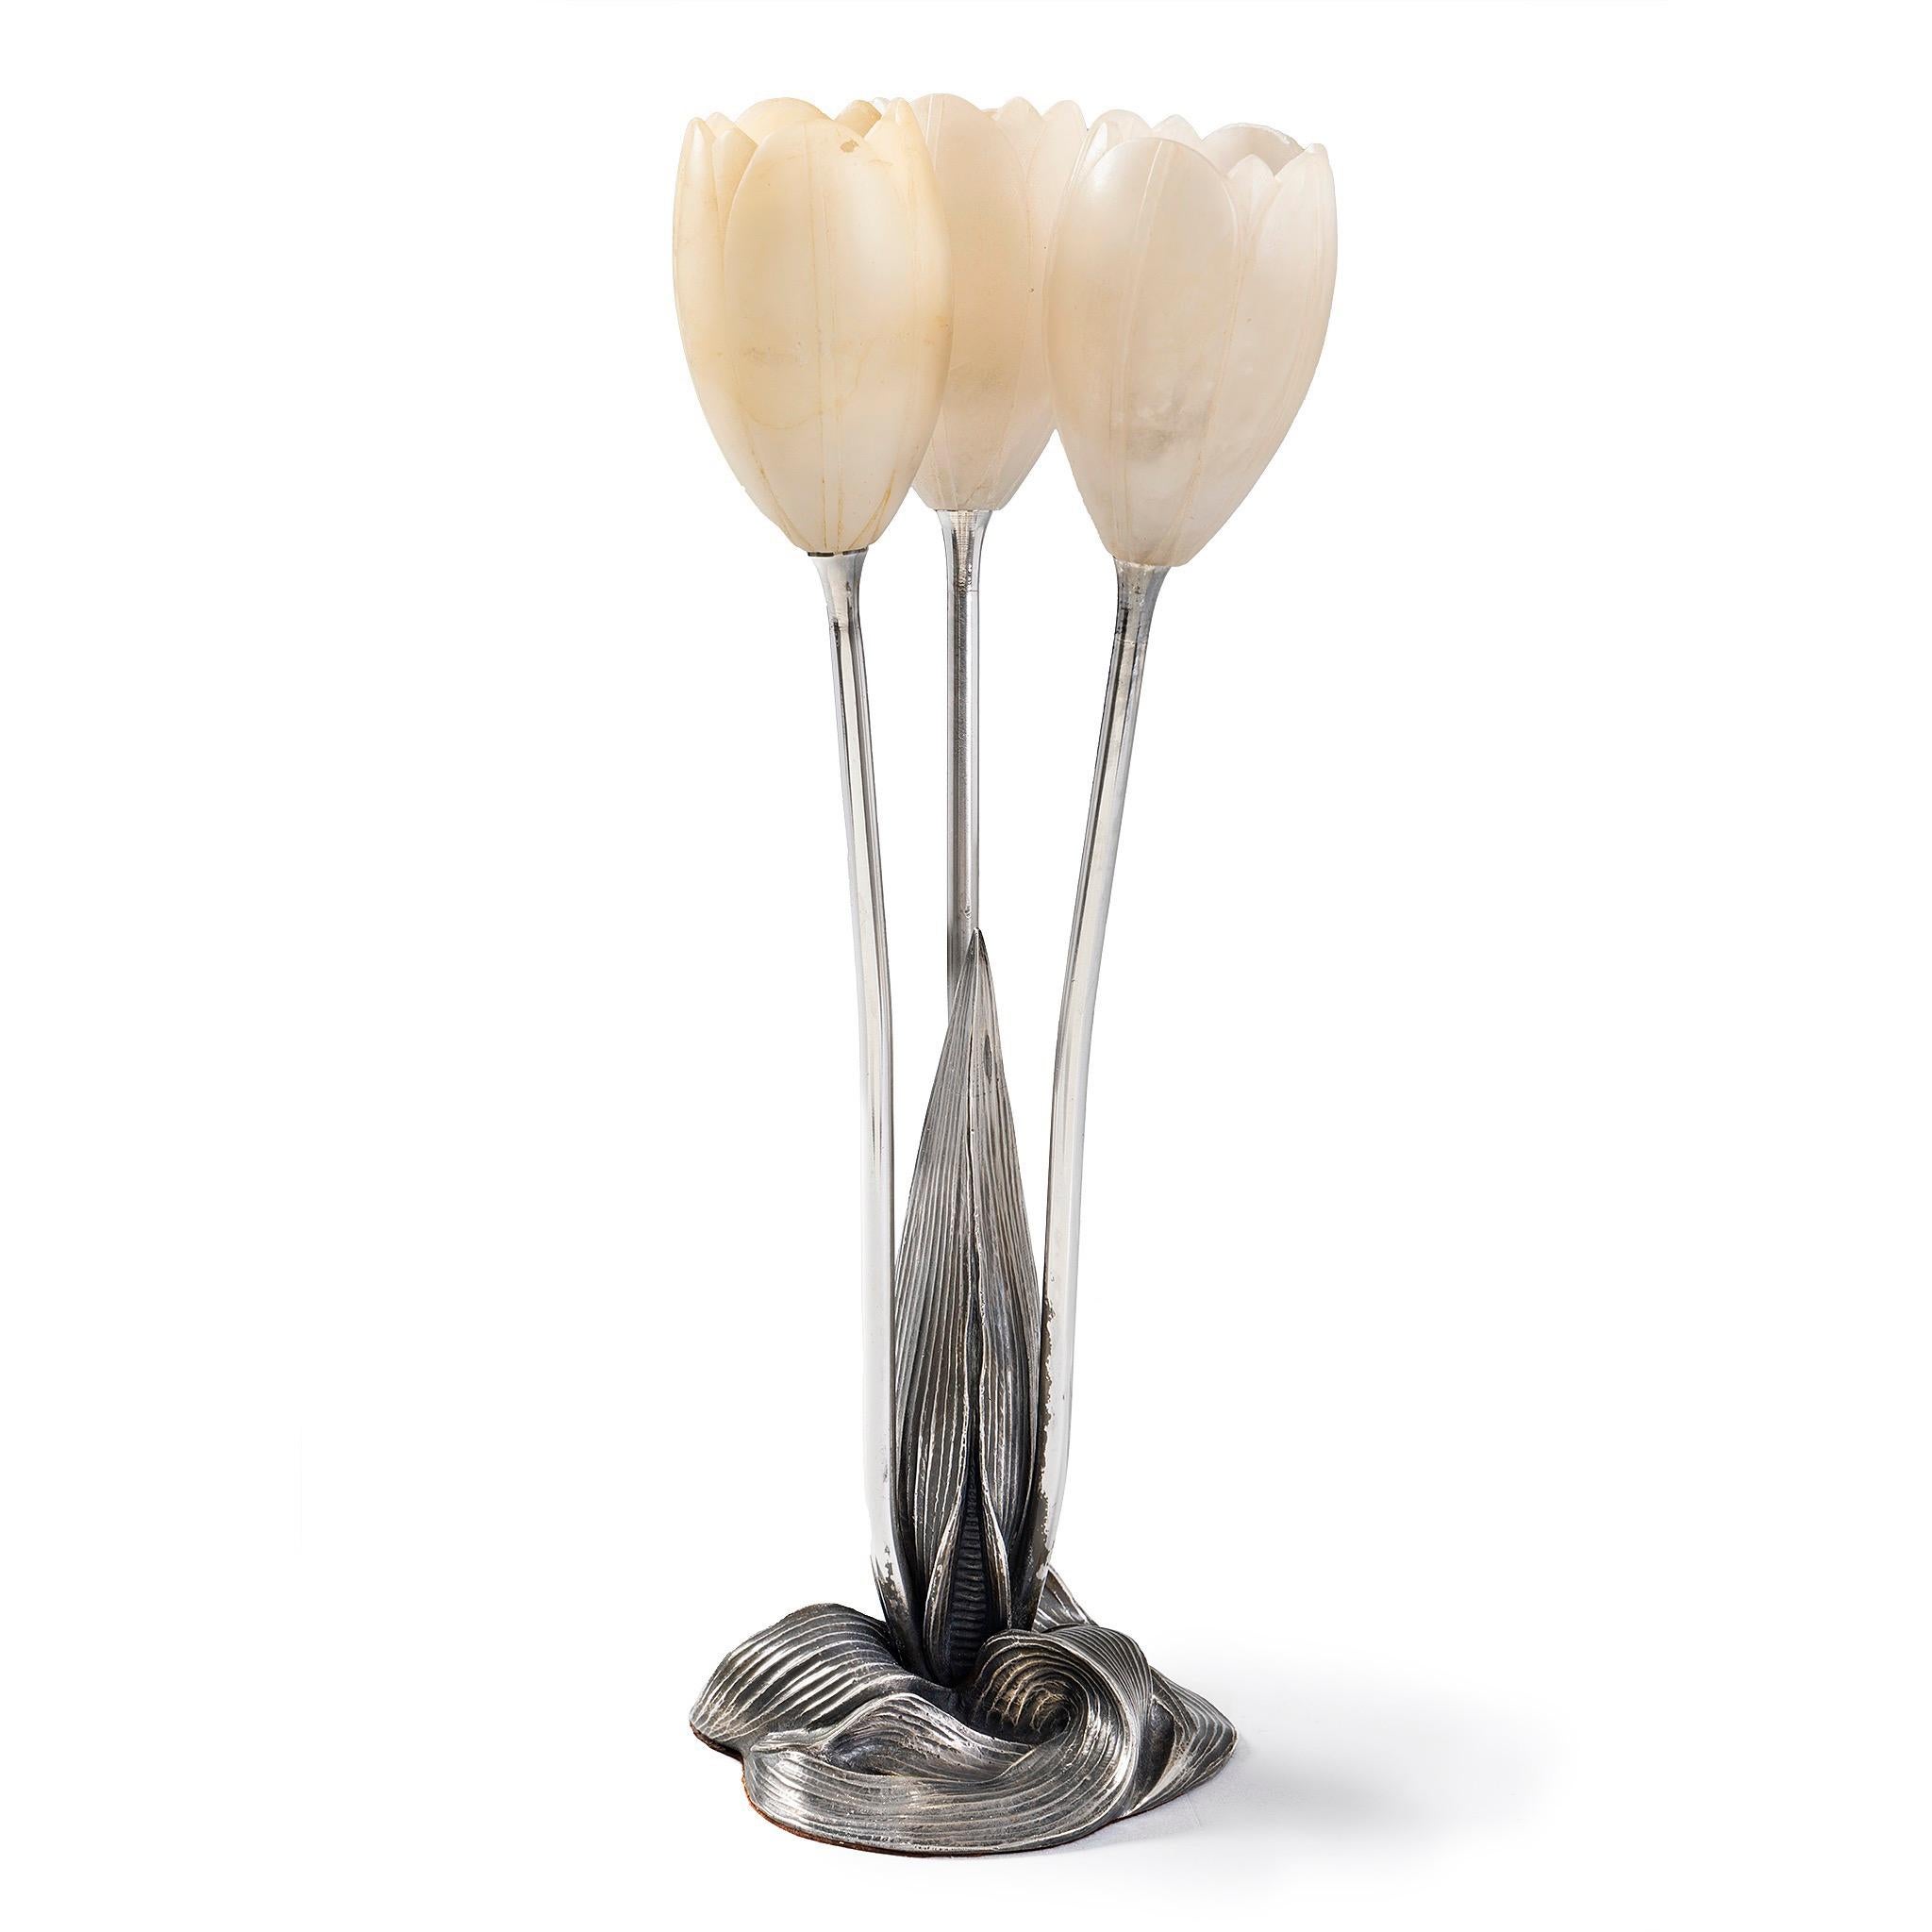 The innovative structure of Albert Cheuret's lamp mirrors a cluster of three white tulips emerging from a mound of earth. Cheuret fashioned his lamp as a trio of tulip flowers featuring intricately carved alabaster flowerheads. The use of alabaster,